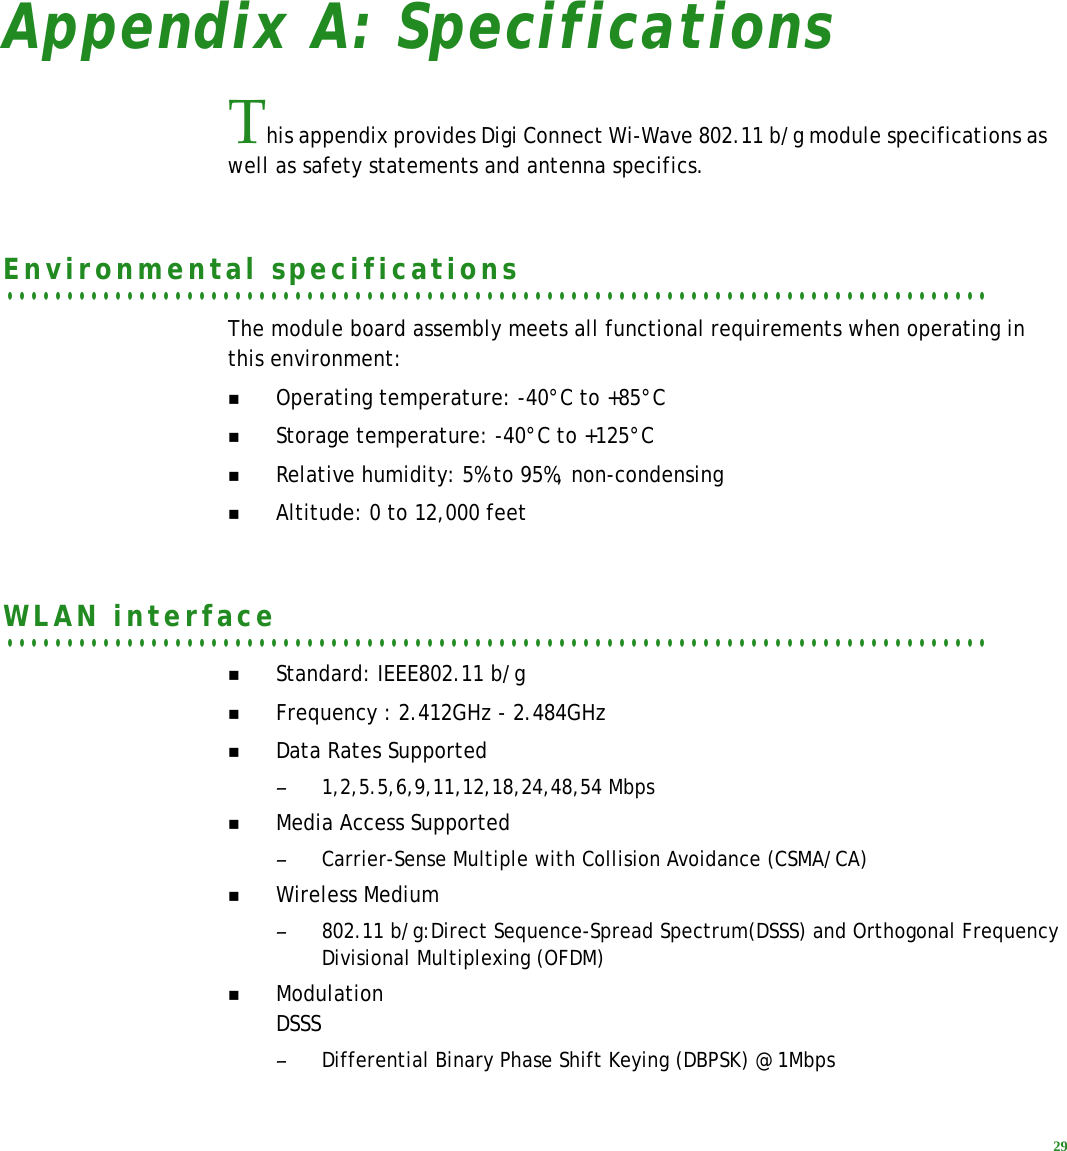 29Appendix A: SpecificationsThis appendix provides Digi Connect Wi-Wave 802.11 b/g module specifications as well as safety statements and antenna specifics.. . . . . . . . . . . . . . . . . . . . . . . . . . . . . . . . . . . . . . . . . . . . . . . . . . . . . . . . . . . . . . . . . . . . . . . . . . . . . . . . . .Environmental specificationsThe module board assembly meets all functional requirements when operating in this environment:Operating temperature: -40°C to +85°CStorage temperature: -40°C to +125°CRelative humidity: 5% to 95%, non-condensingAltitude: 0 to 12,000 feet. . . . . . . . . . . . . . . . . . . . . . . . . . . . . . . . . . . . . . . . . . . . . . . . . . . . . . . . . . . . . . . . . . . . . . . . . . . . . . . . . .WLAN interfaceStandard: IEEE802.11 b/gFrequency : 2.412GHz - 2.484GHzData Rates Supported–1,2,5.5,6,9,11,12,18,24,48,54 MbpsMedia Access Supported–Carrier-Sense Multiple with Collision Avoidance (CSMA/CA)Wireless Medium–802.11 b/g:Direct Sequence-Spread Spectrum(DSSS) and Orthogonal Frequency Divisional Multiplexing (OFDM)ModulationDSSS–Differential Binary Phase Shift Keying (DBPSK) @ 1Mbps